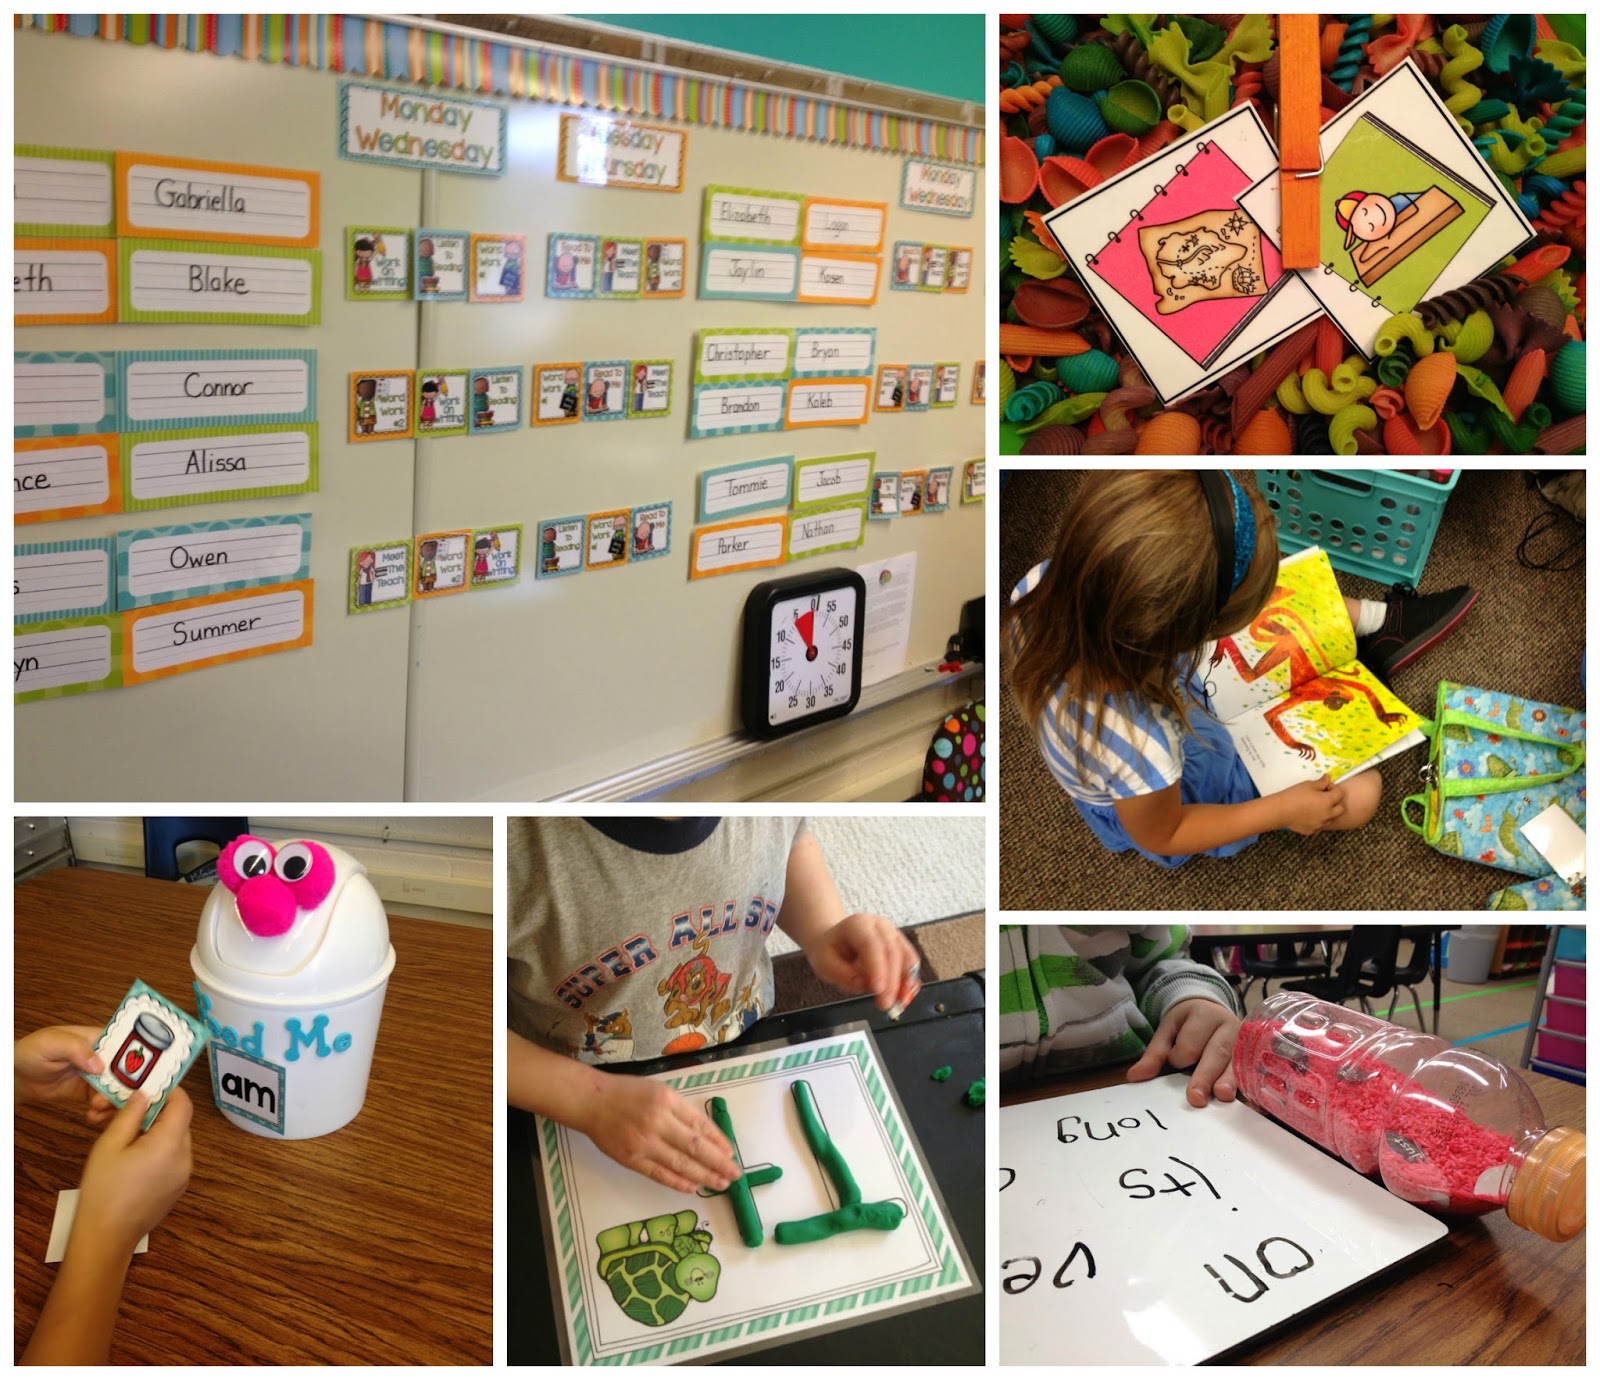 This blog post has daily schedules for a kindergarten classroom including Daily 5